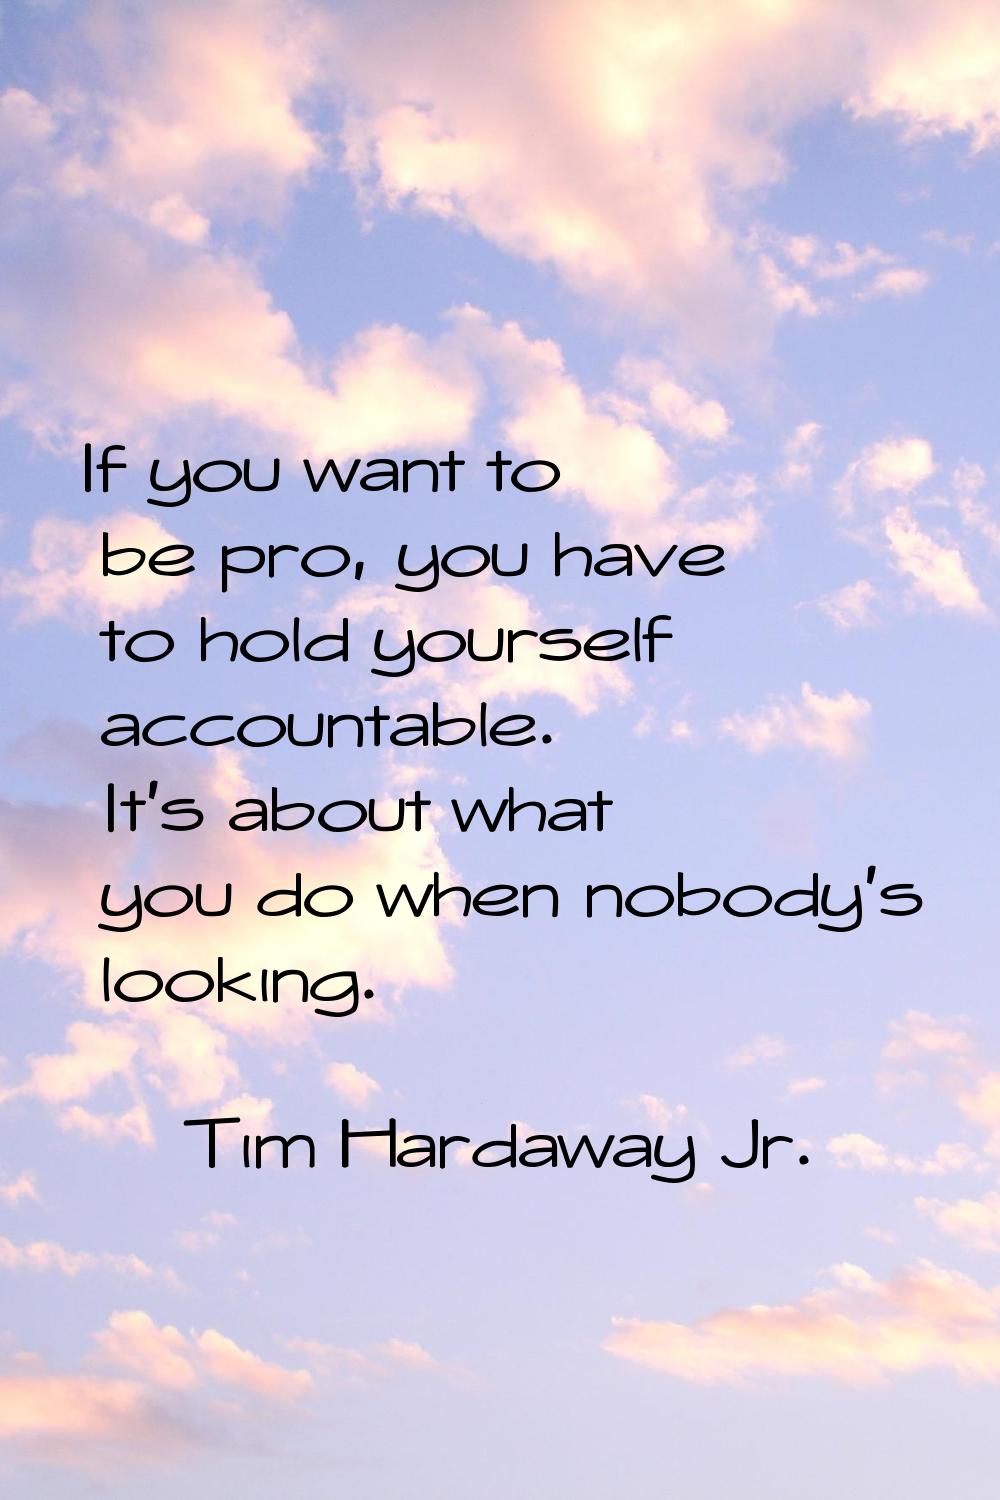 If you want to be pro, you have to hold yourself accountable. It's about what you do when nobody's 